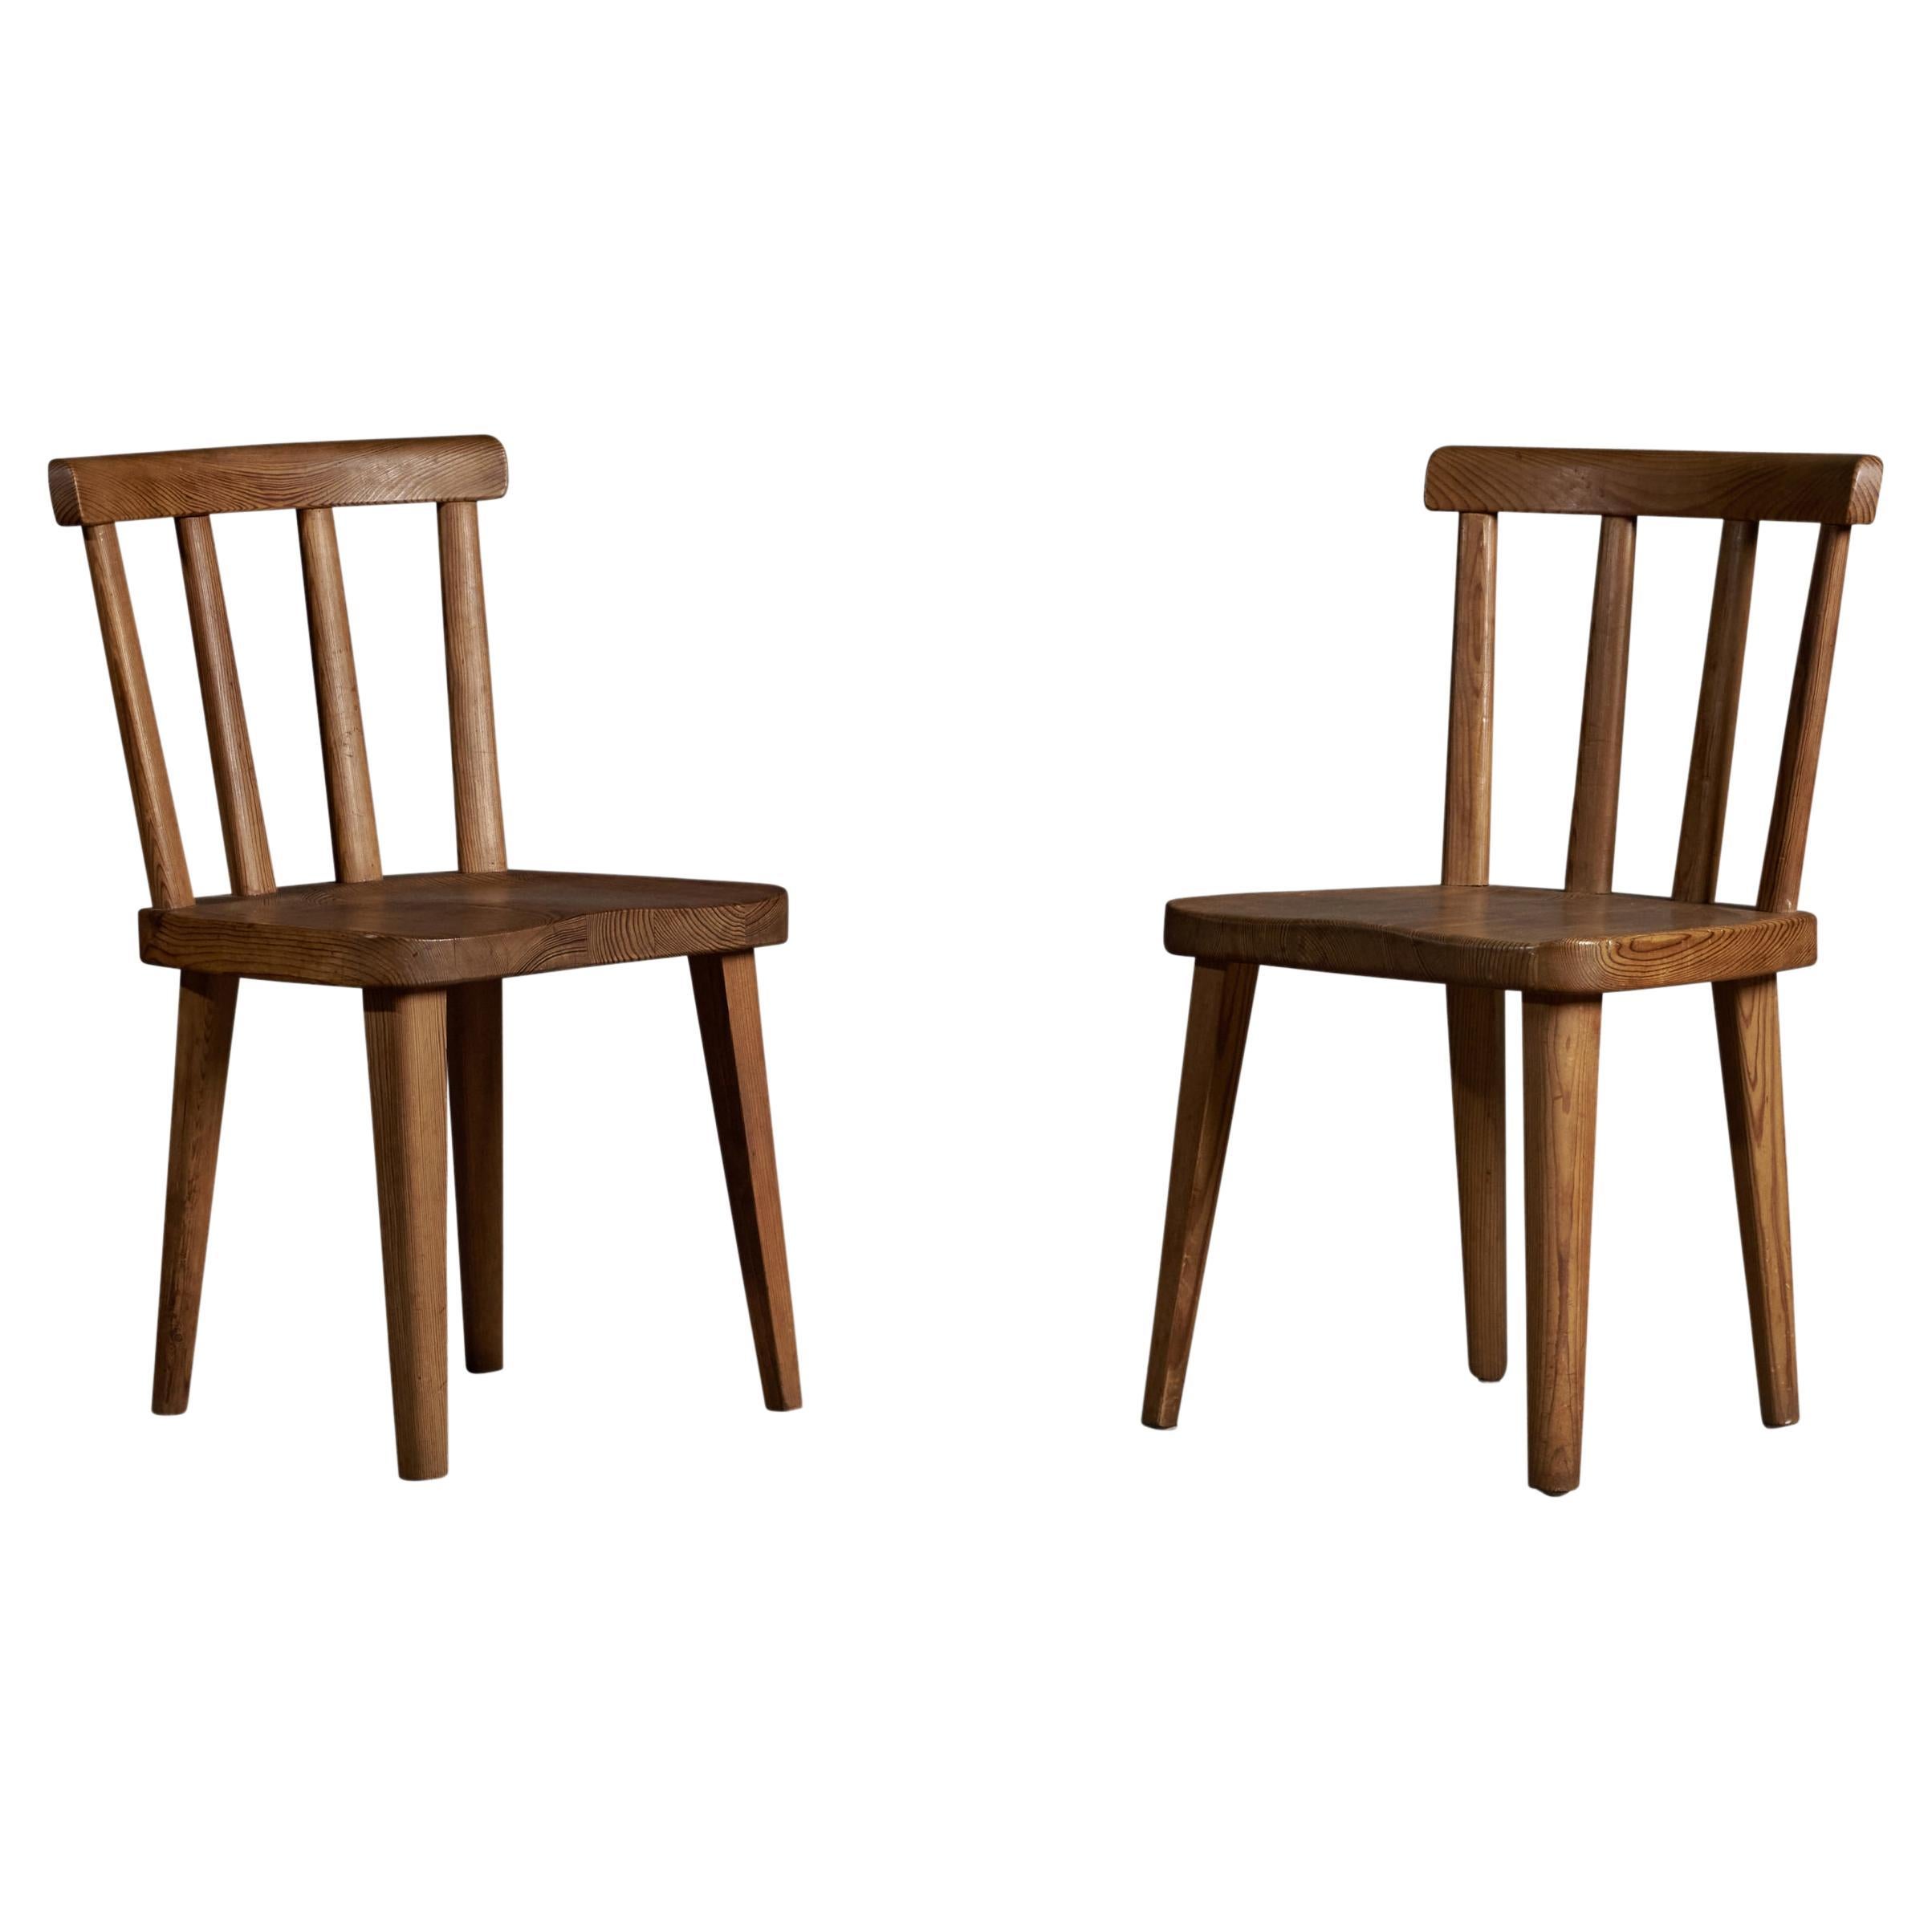 Axel Einar Hjorth, "Utö" Side Chairs, Pine, Sweden, 1930s For Sale